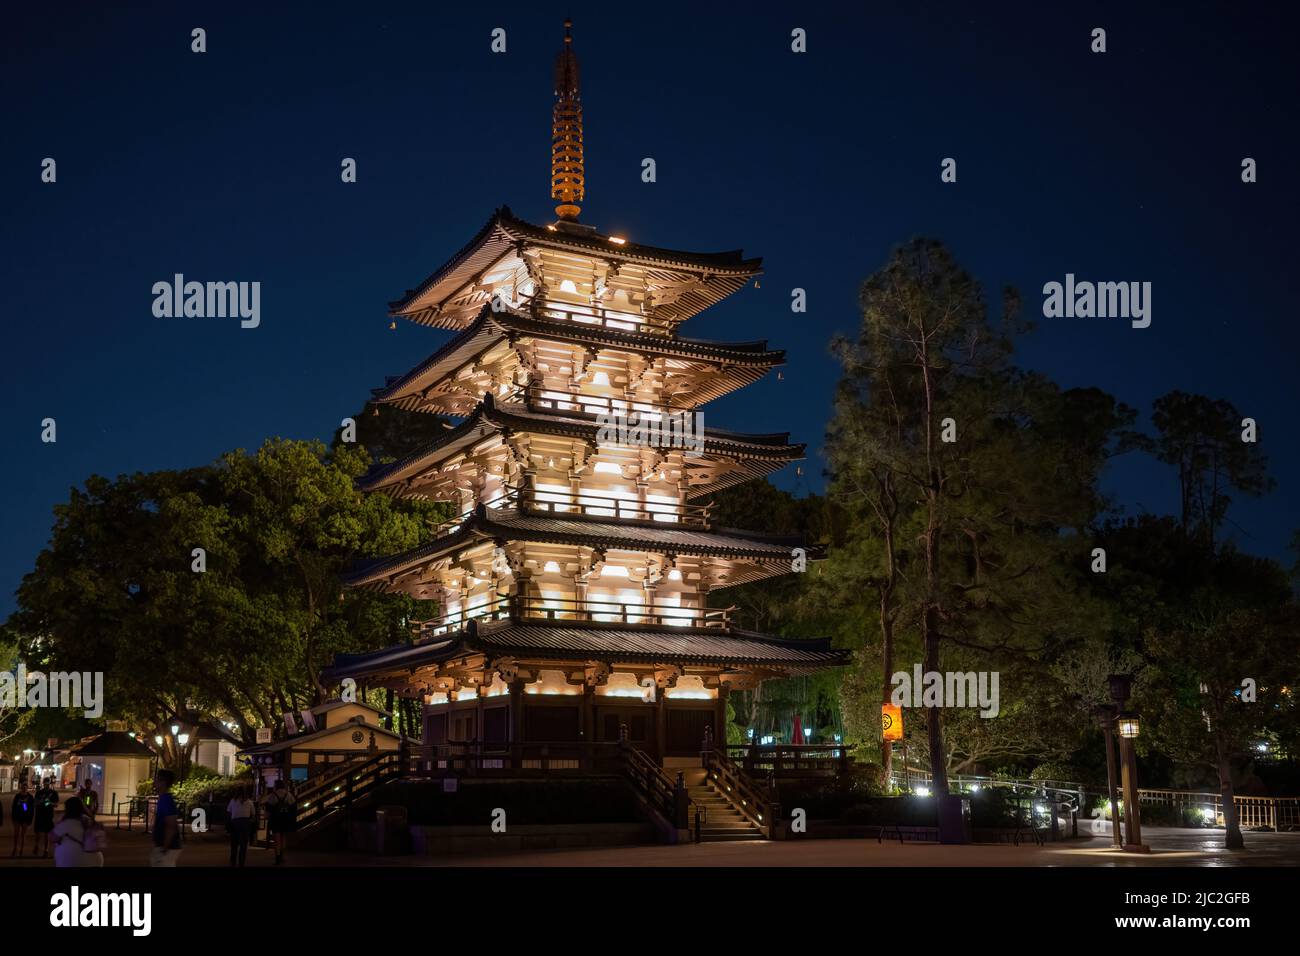 Lake Buena Vista, Florida, March 28, 2022: A building in the Japanese pavilion at Walt Disney World's Epcot Center. Stock Photo